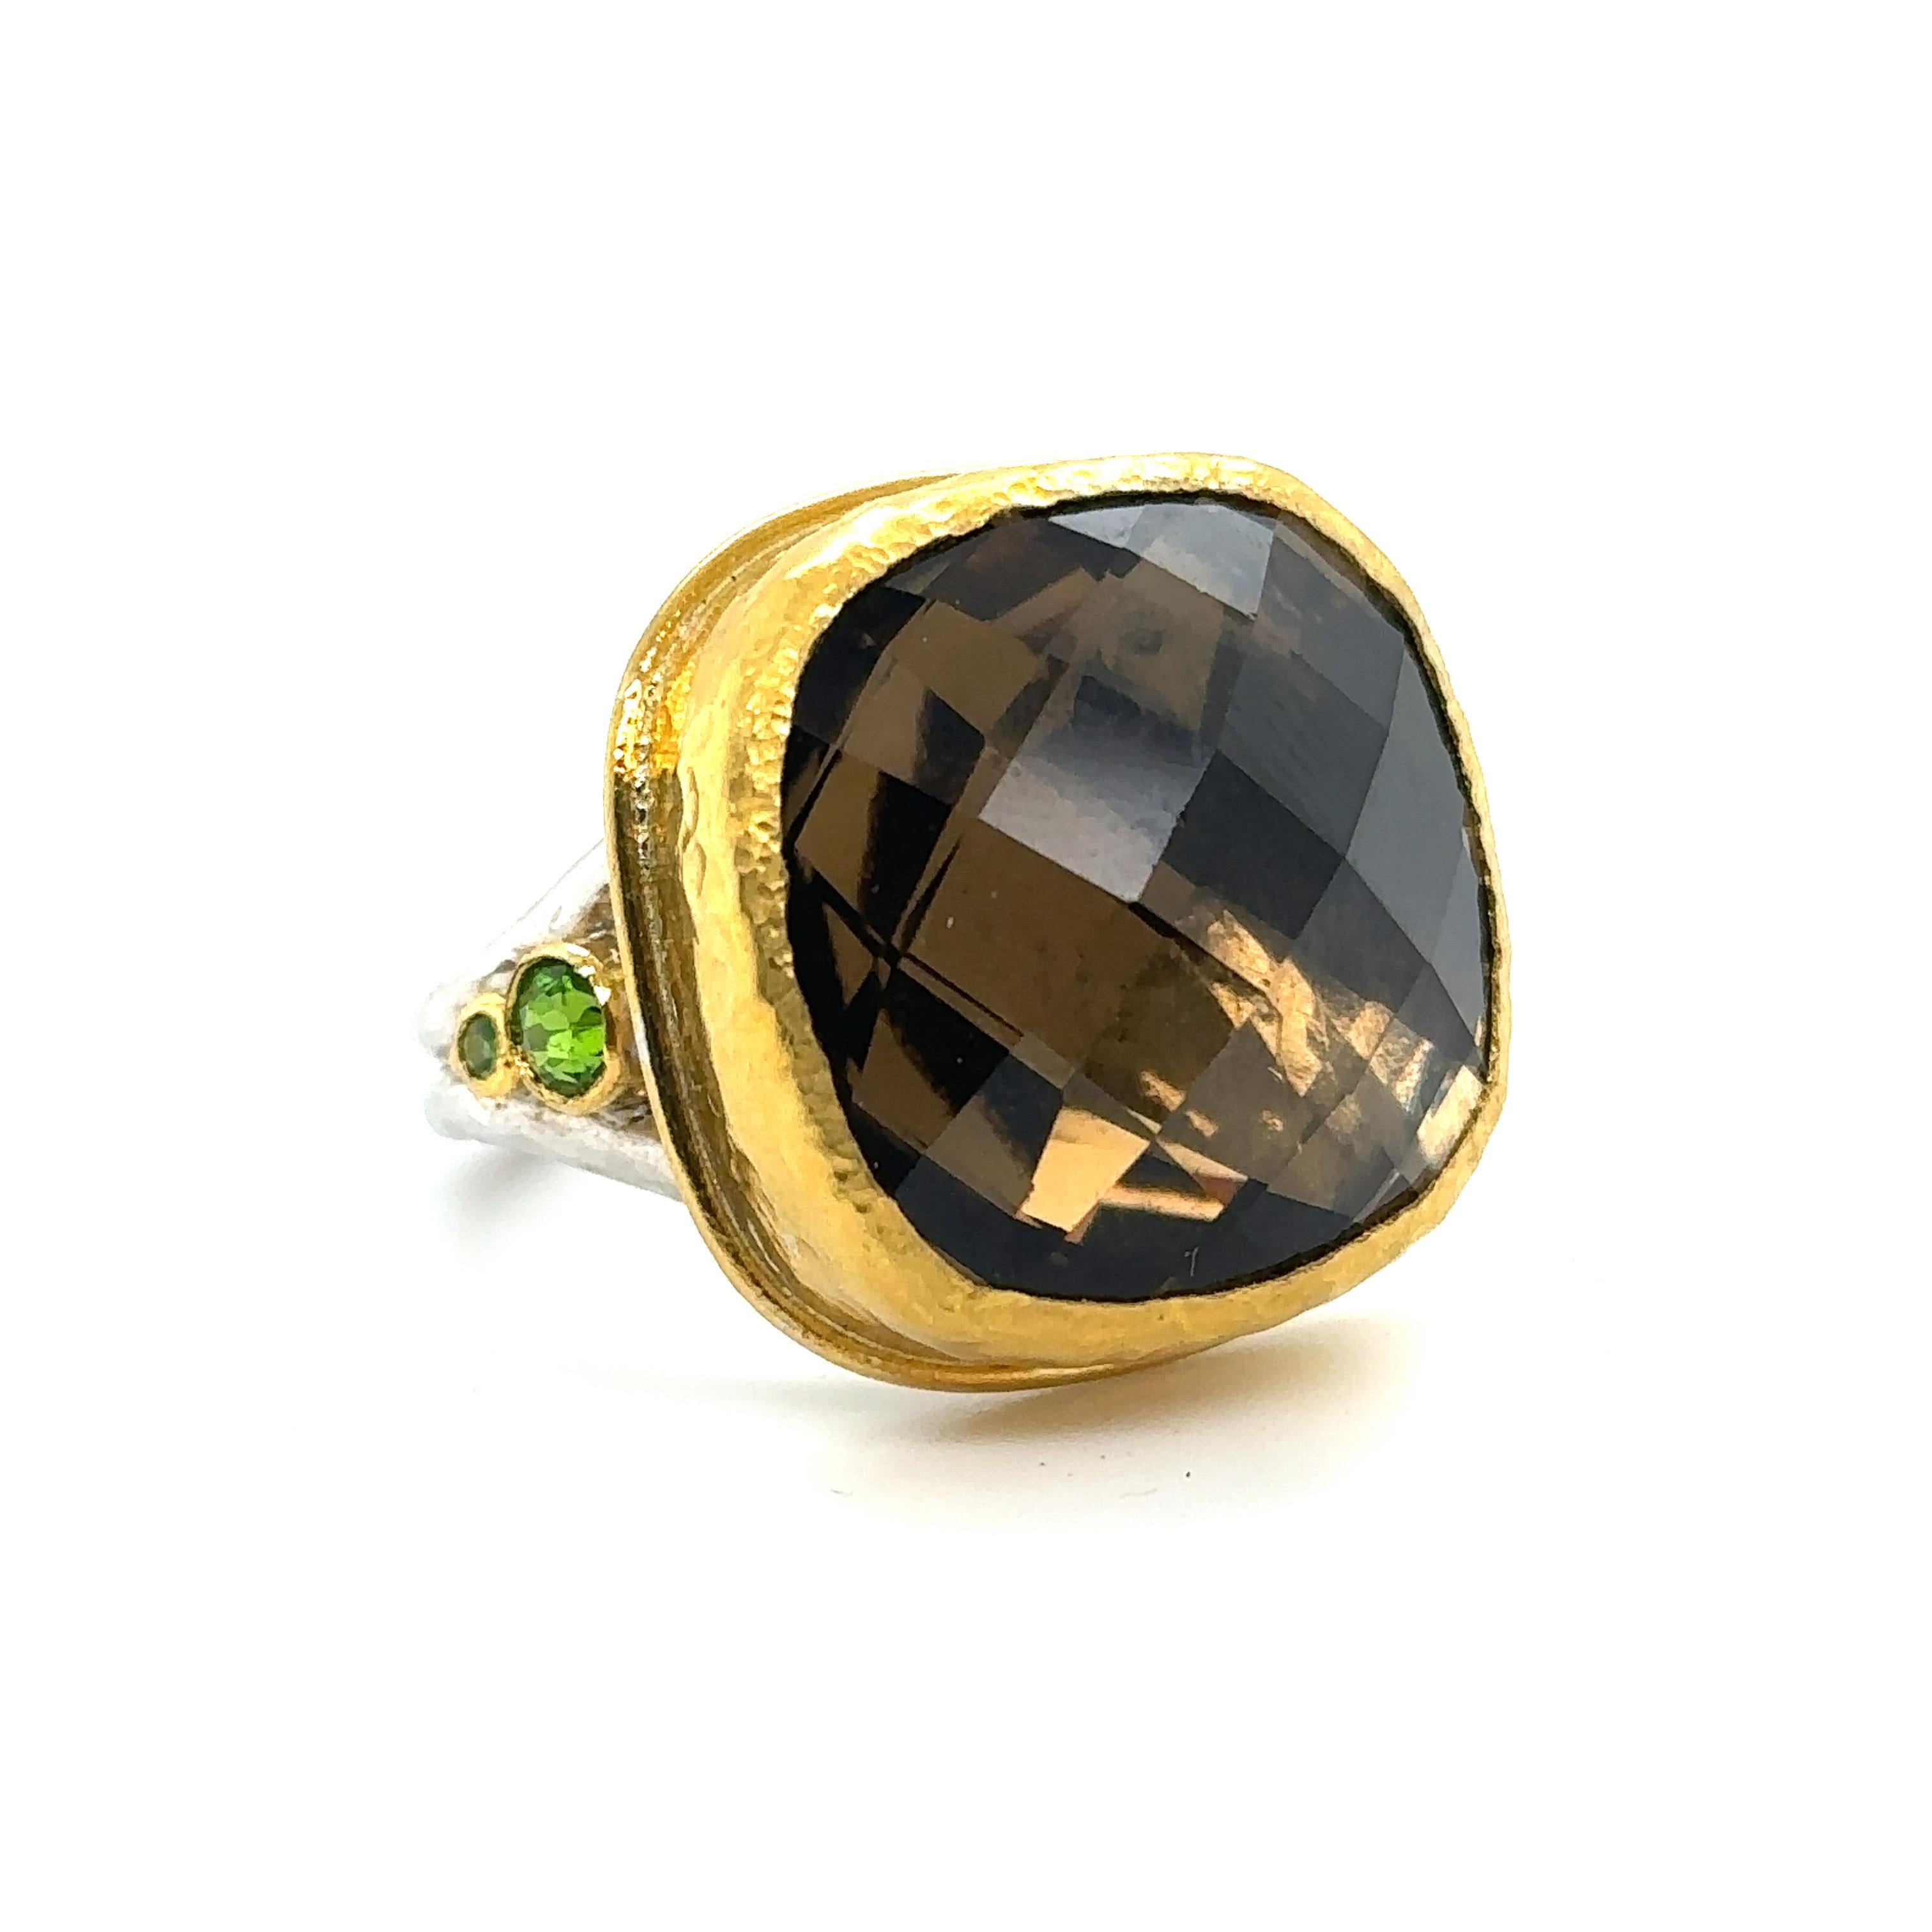 24KT GOLD/SS with CUSHION CUT SMOKY QUARTZ AND CHROME DIOPSIDES
Metal: 24K GOLD/ SS
Stone Info: 20MM CUSHION CUT SMOKY QUARTZ AND CHROME DIOPSIDES 
Total Stone Weight:  21.0 cwt.
Item Weight: 15.0 gm
Ring Size: 8 (Re-sizable)
Measurements:  22mm X